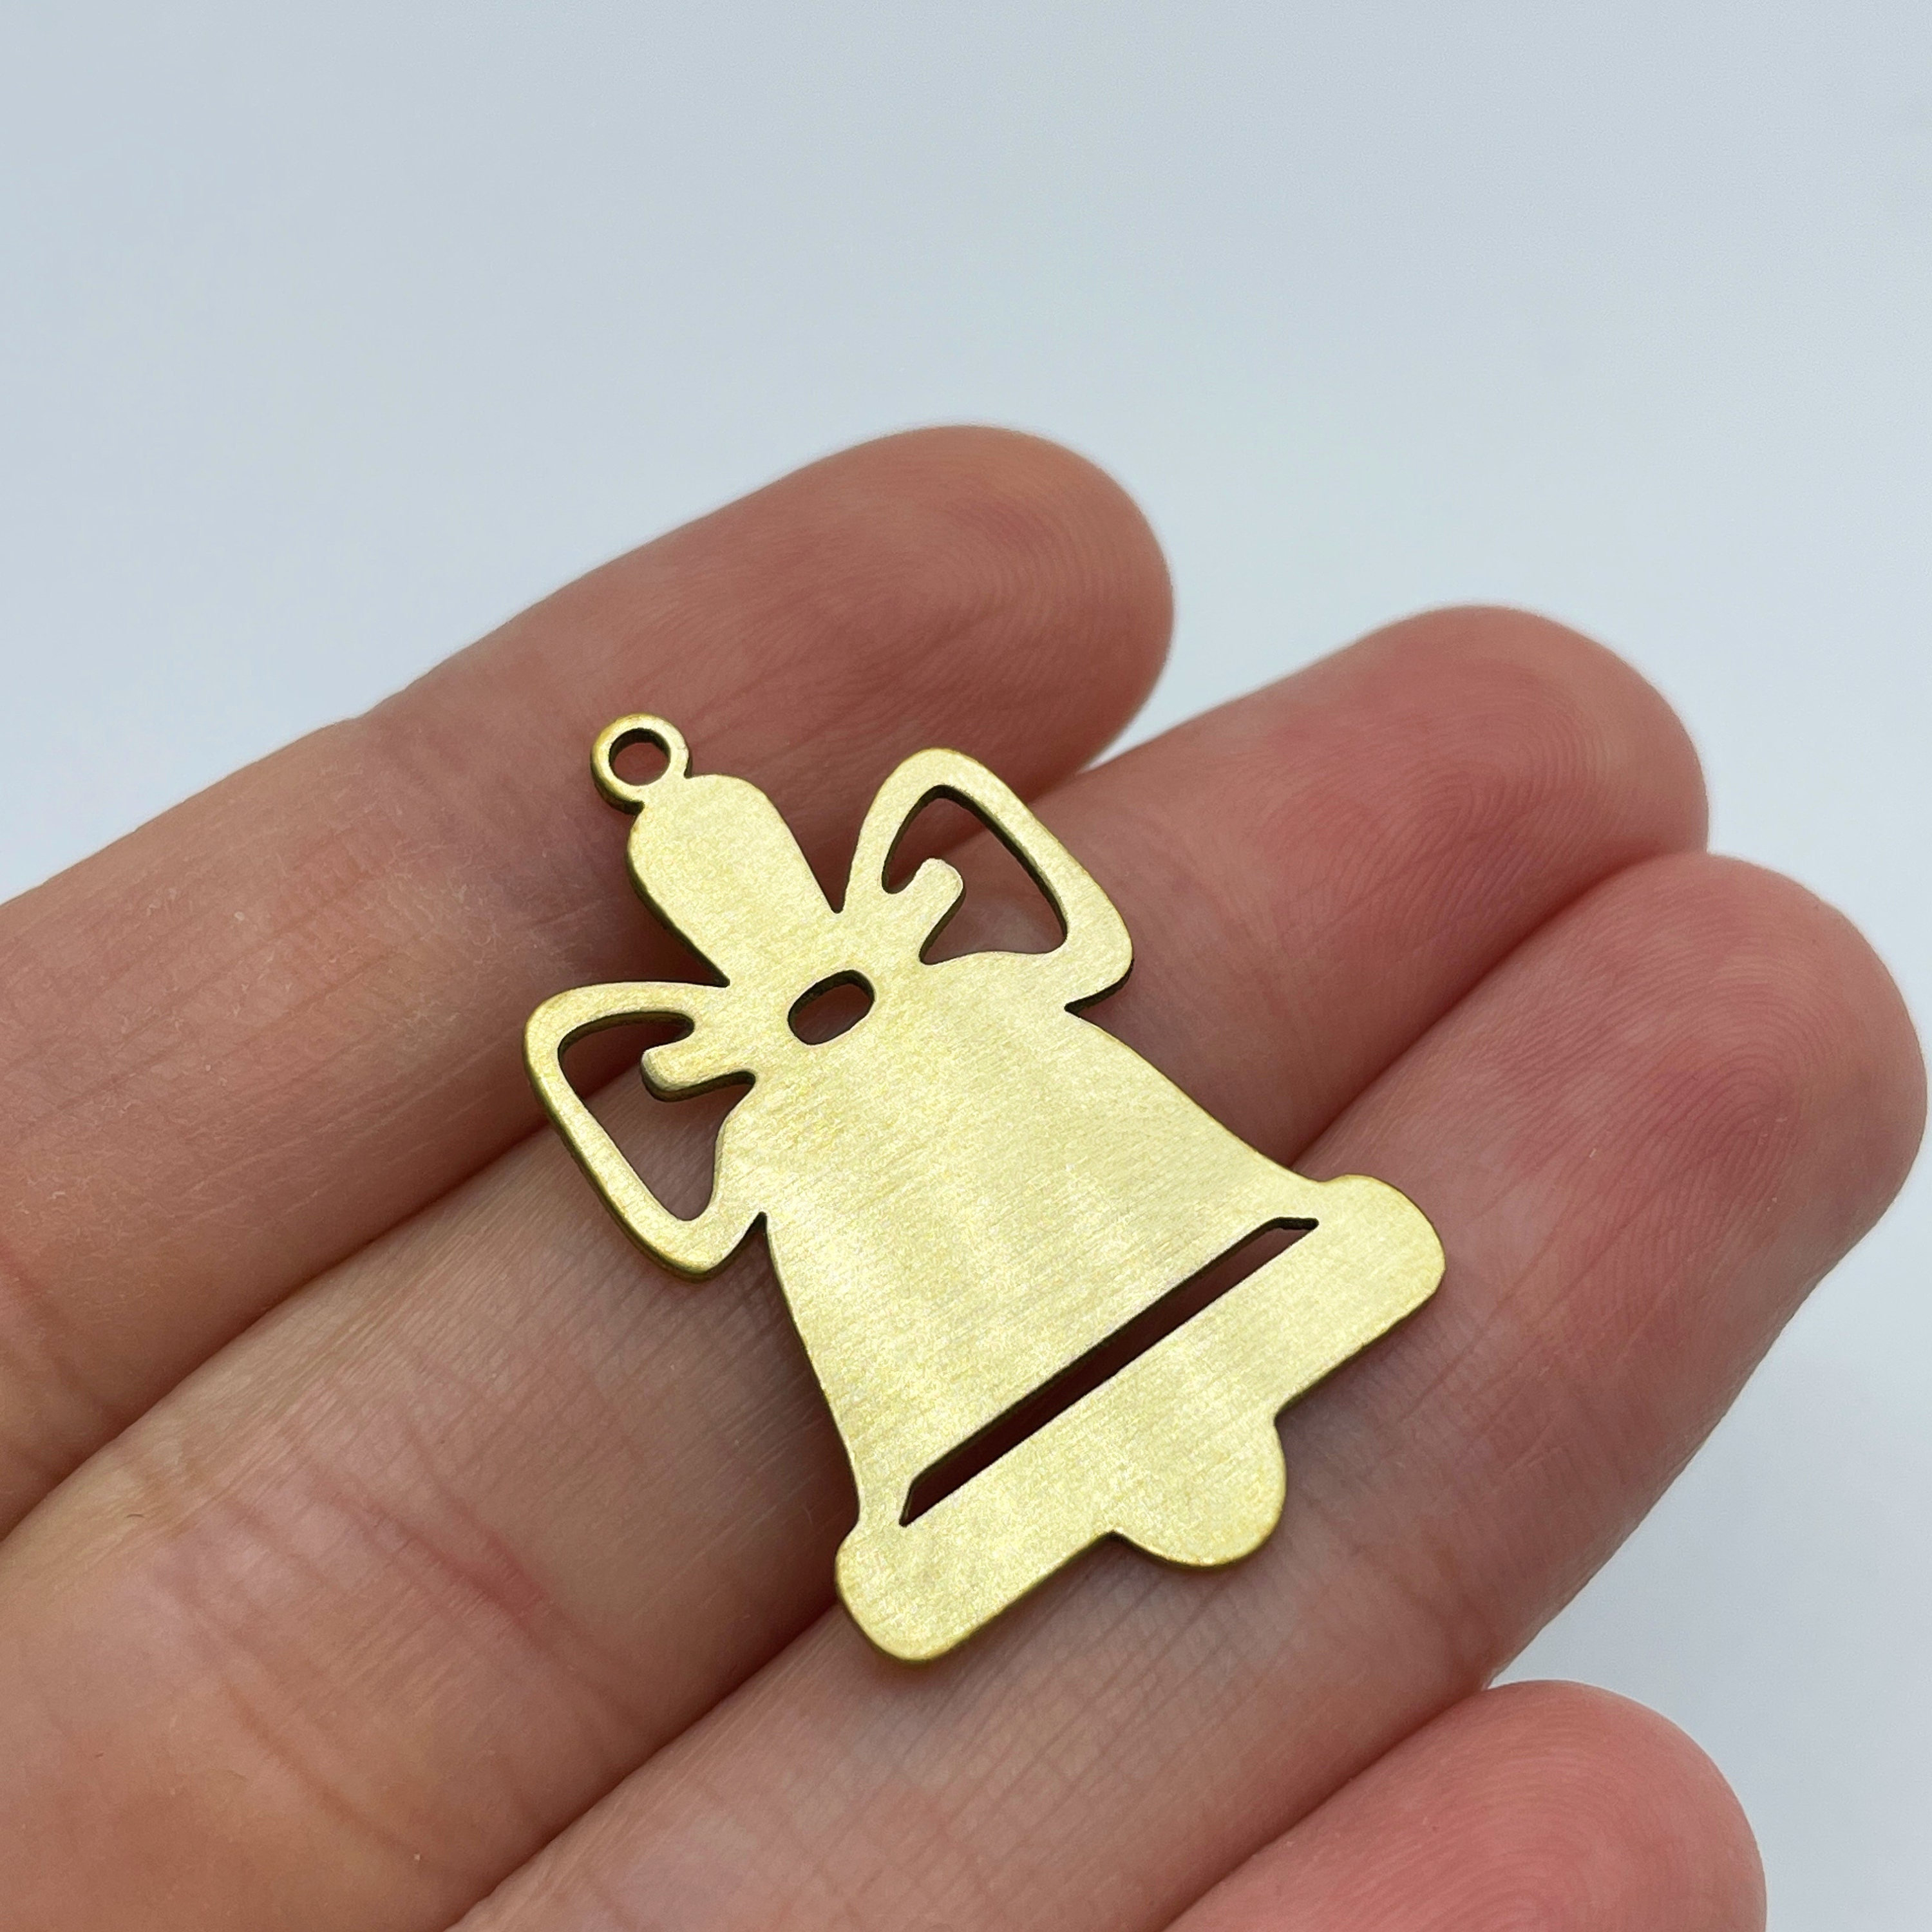 Christmas Bell Charms 2pcs Raw Brass Jingle Bells Charm Laser Cut Jewelry Supplies RW-1379 Christmas Charms Brass Findings DIY Charms